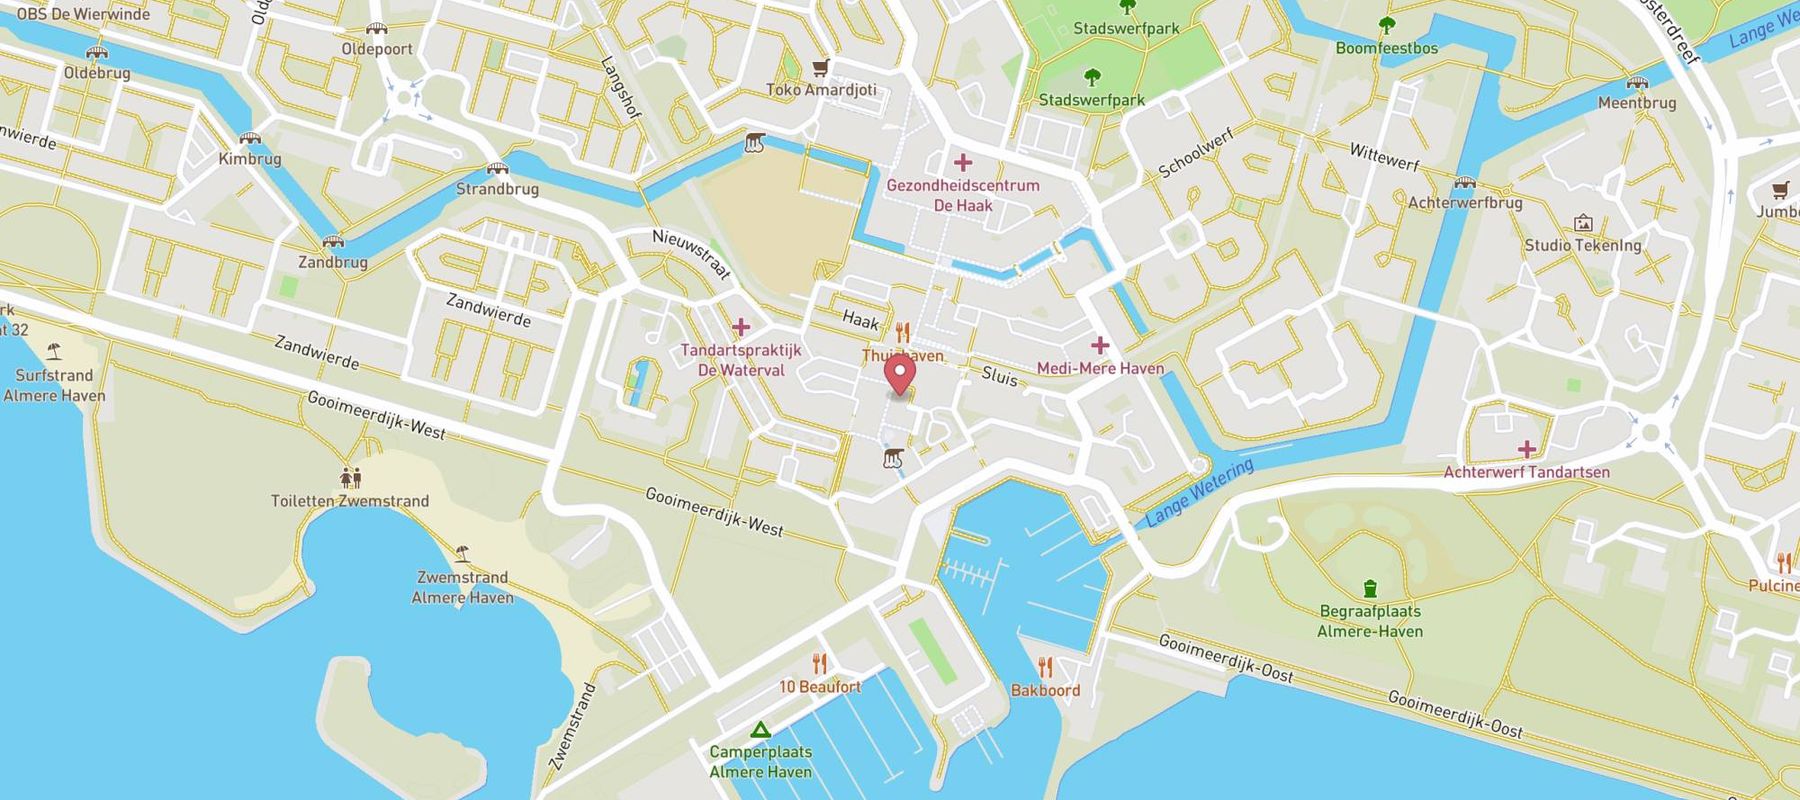 Pearle Opticiens Almere Haven map